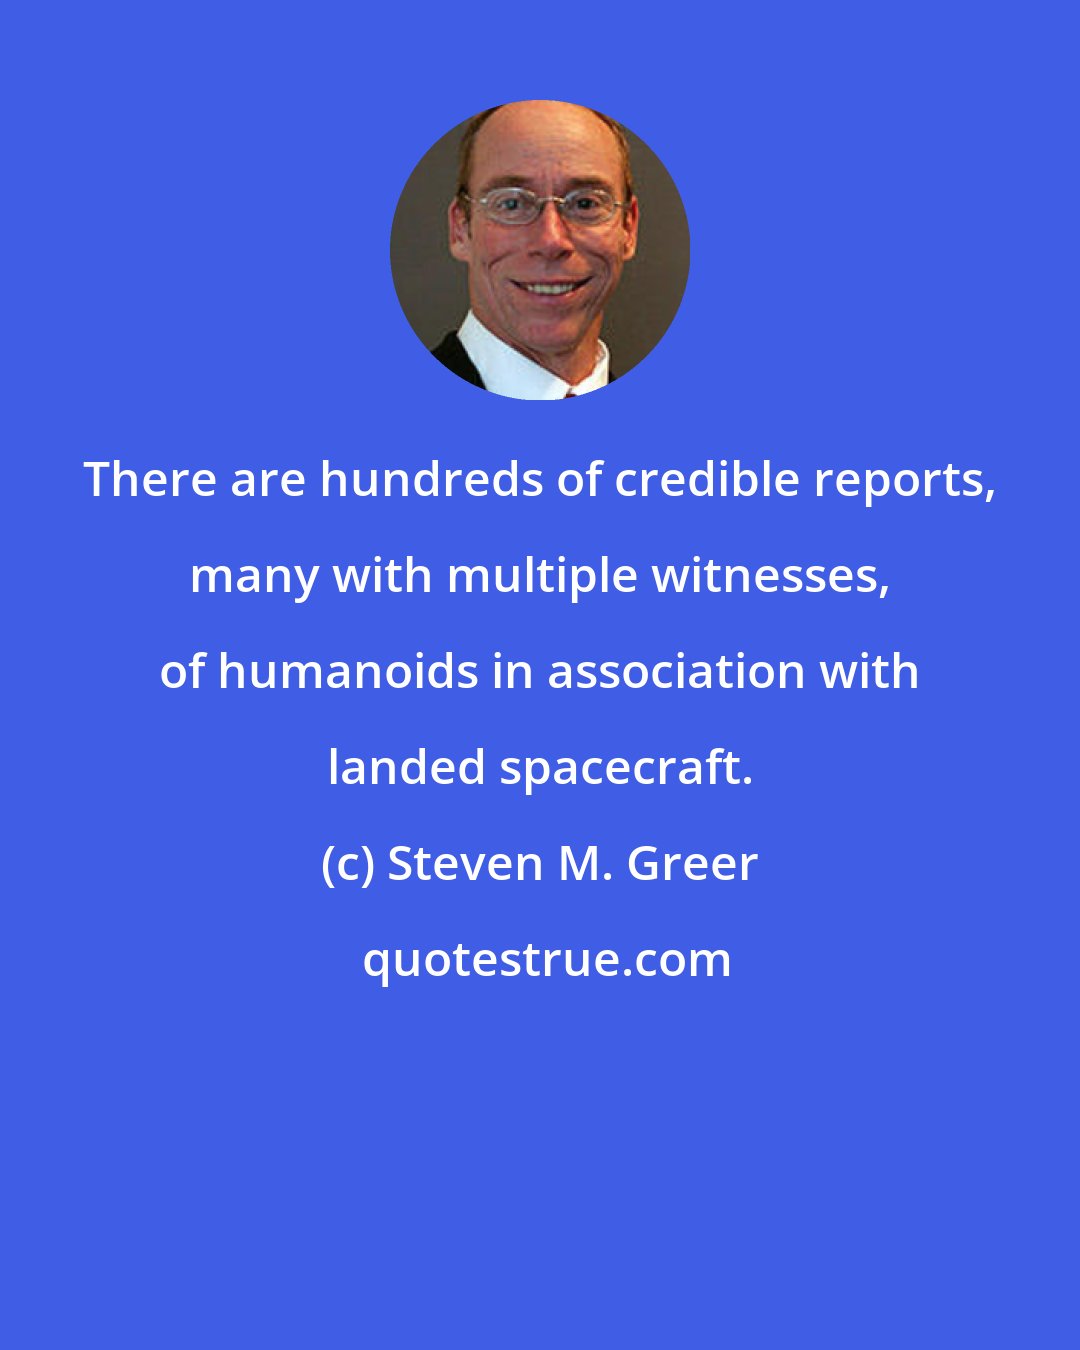 Steven M. Greer: There are hundreds of credible reports, many with multiple witnesses, of humanoids in association with landed spacecraft.